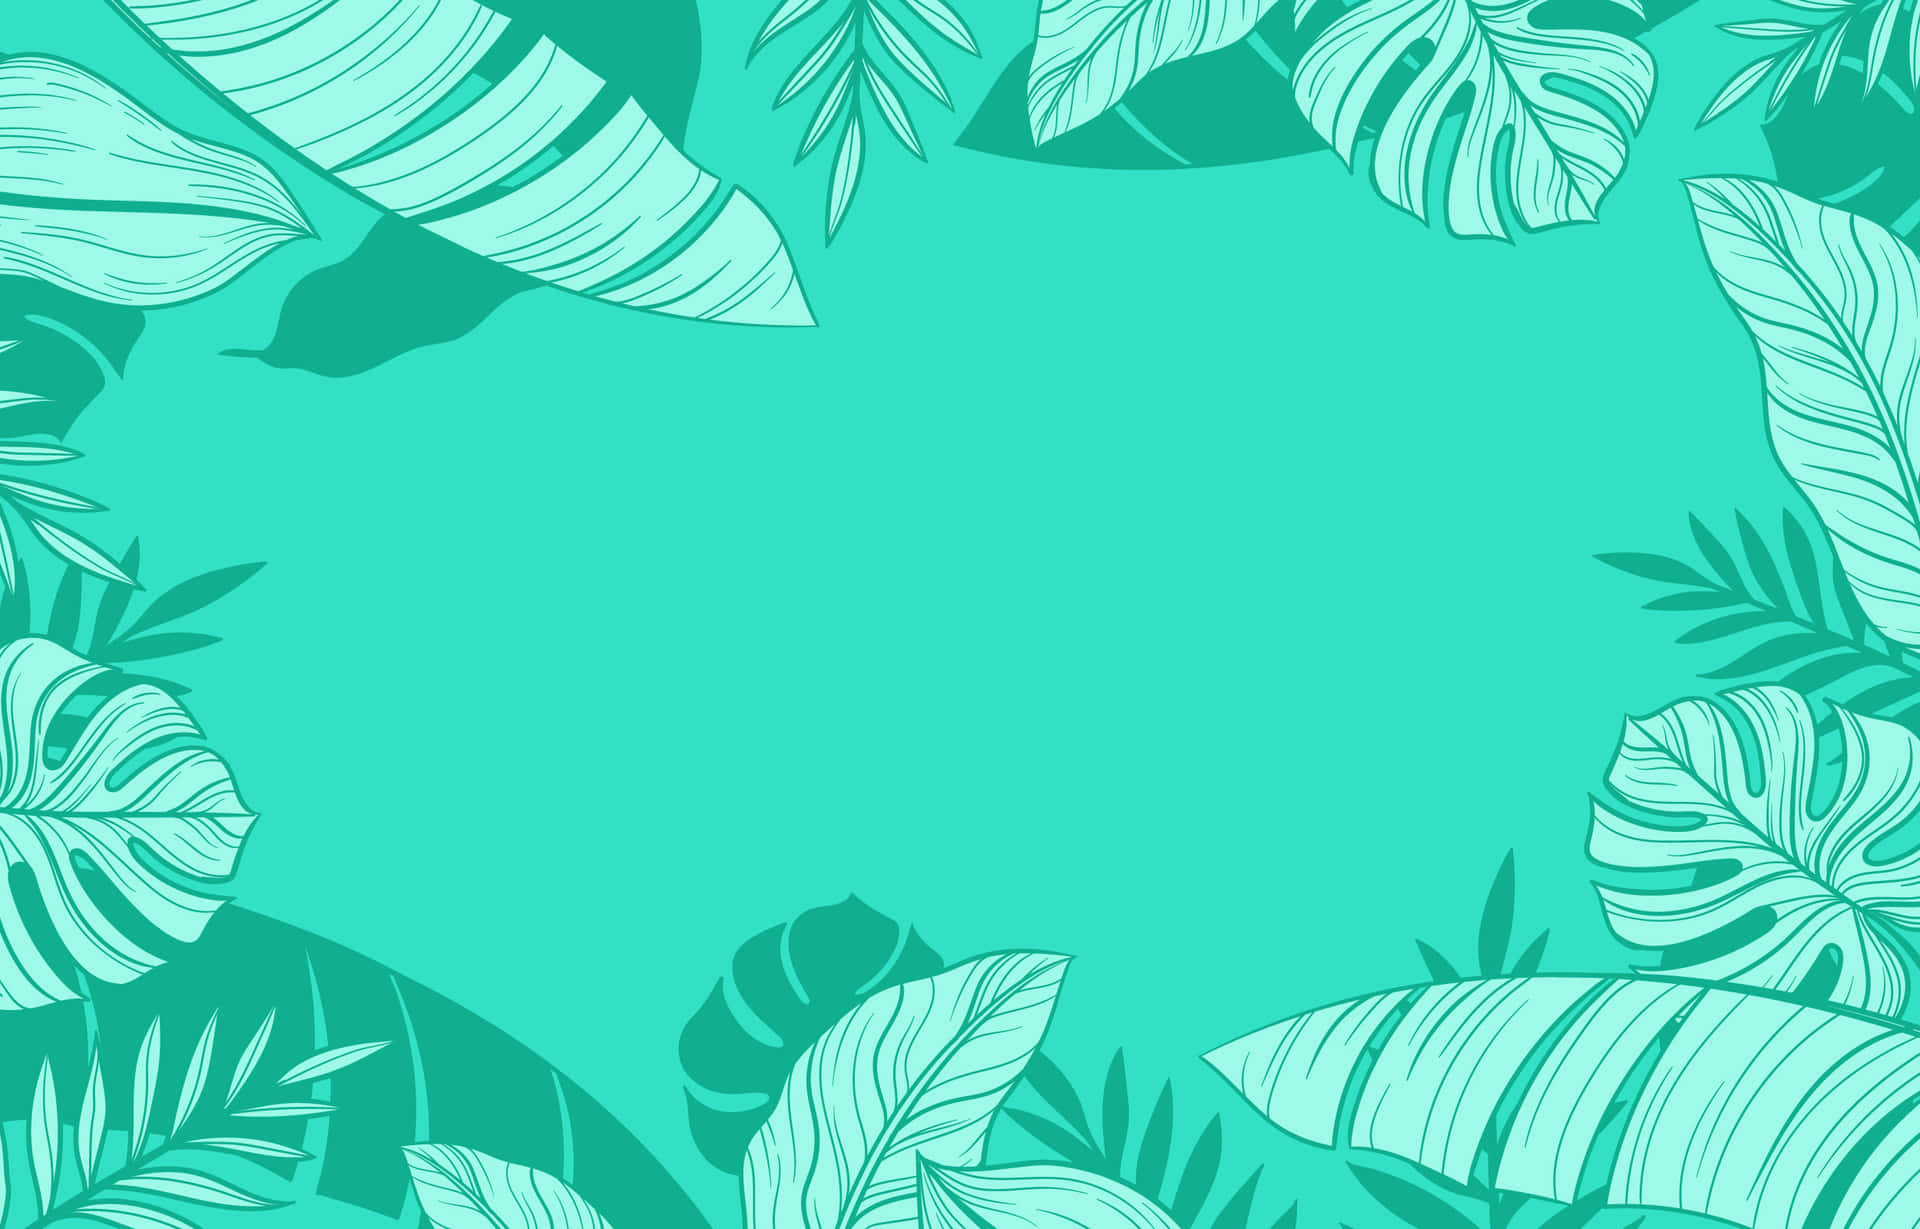 Tropical Leaves Frame On A Turquoise Background